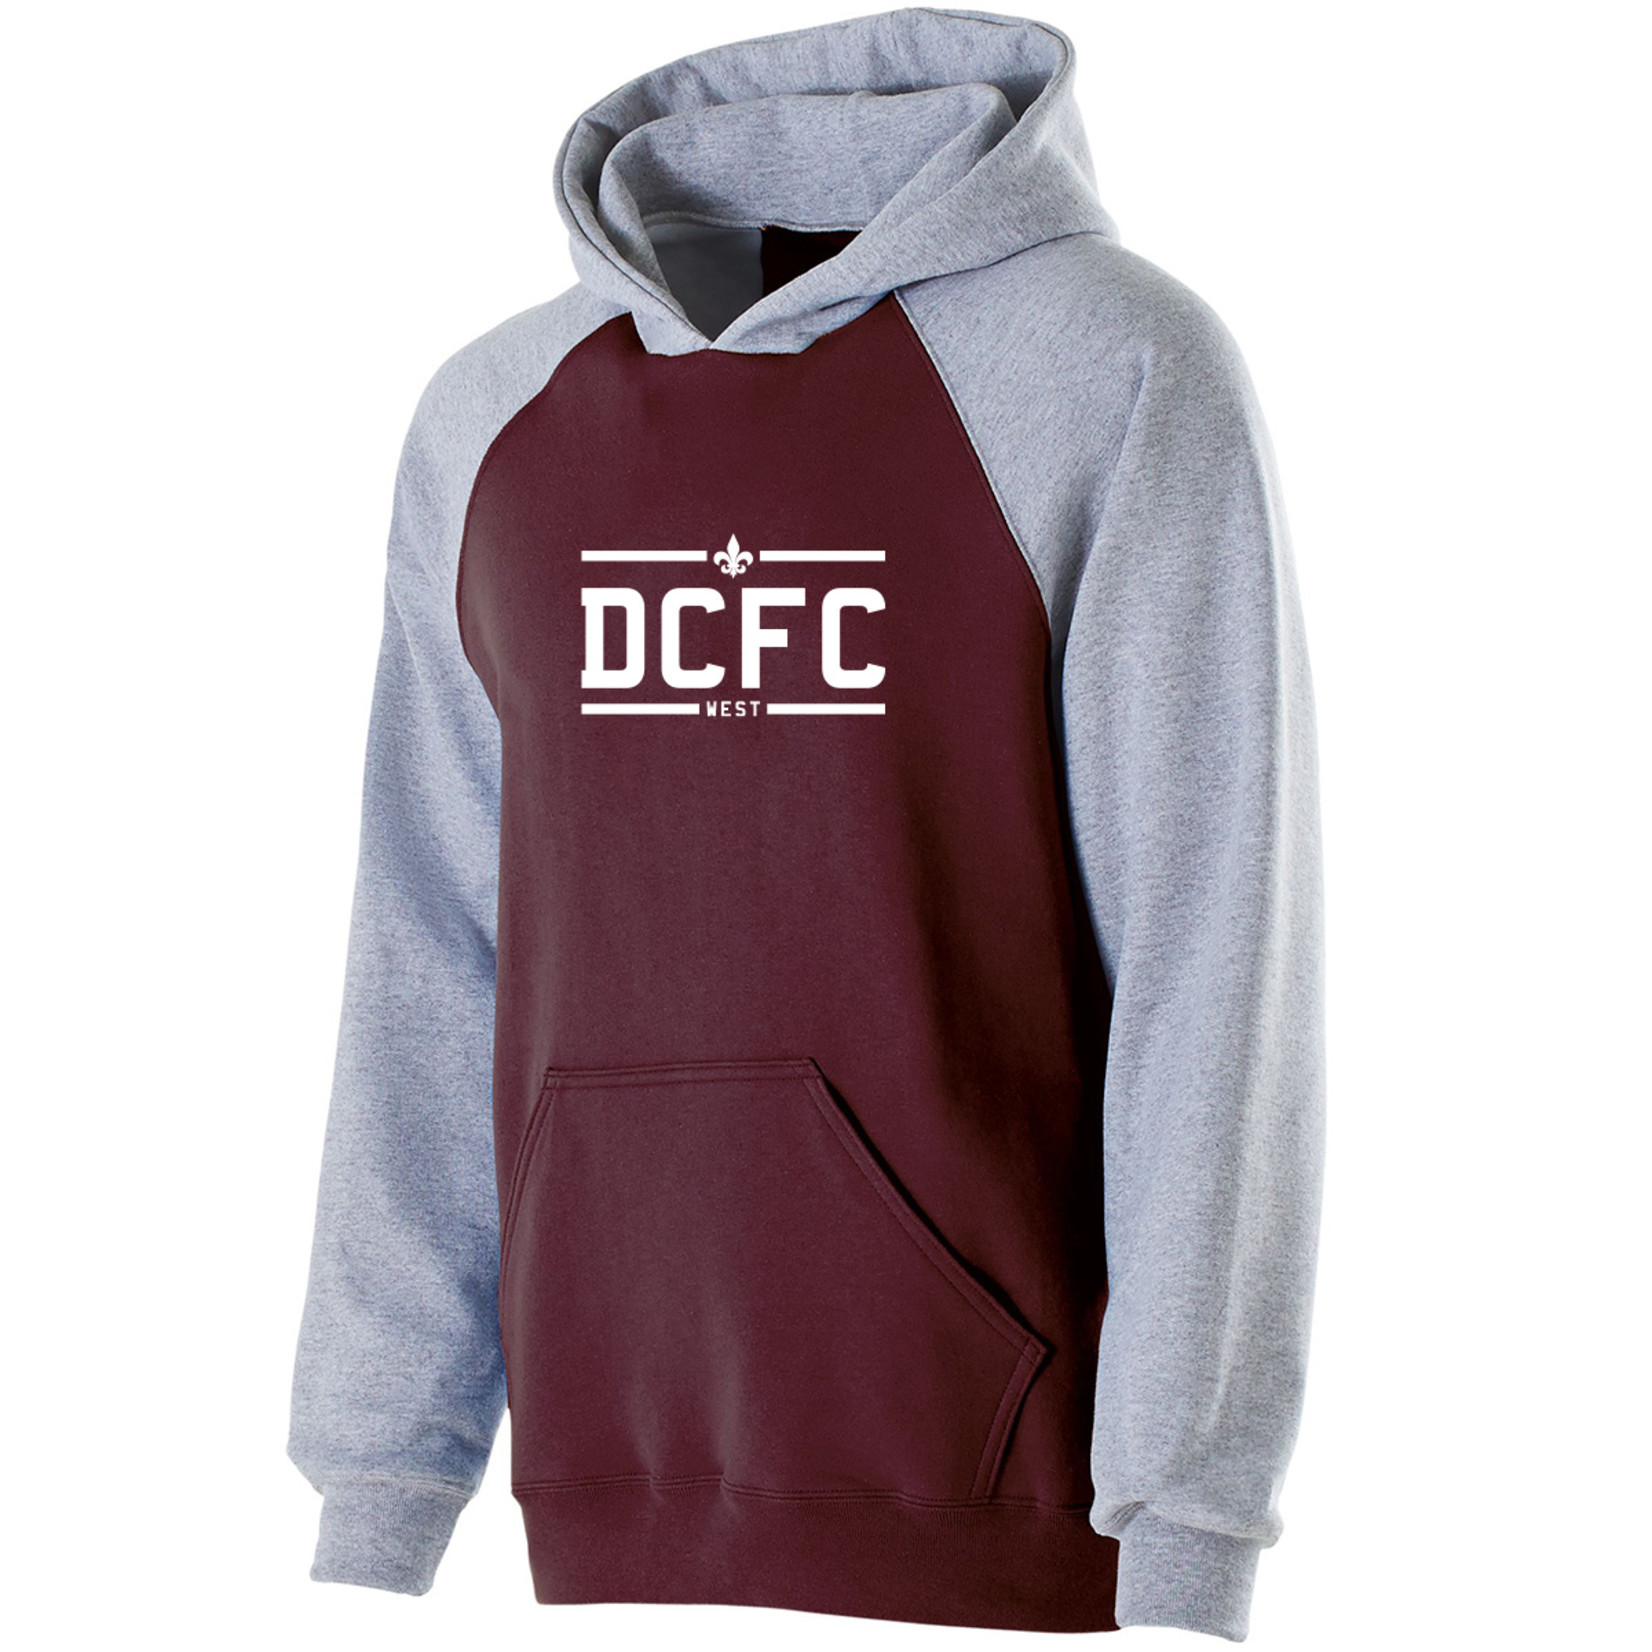 DCFC BANNER HOODIE YOUTH (MAROON/GRAY)